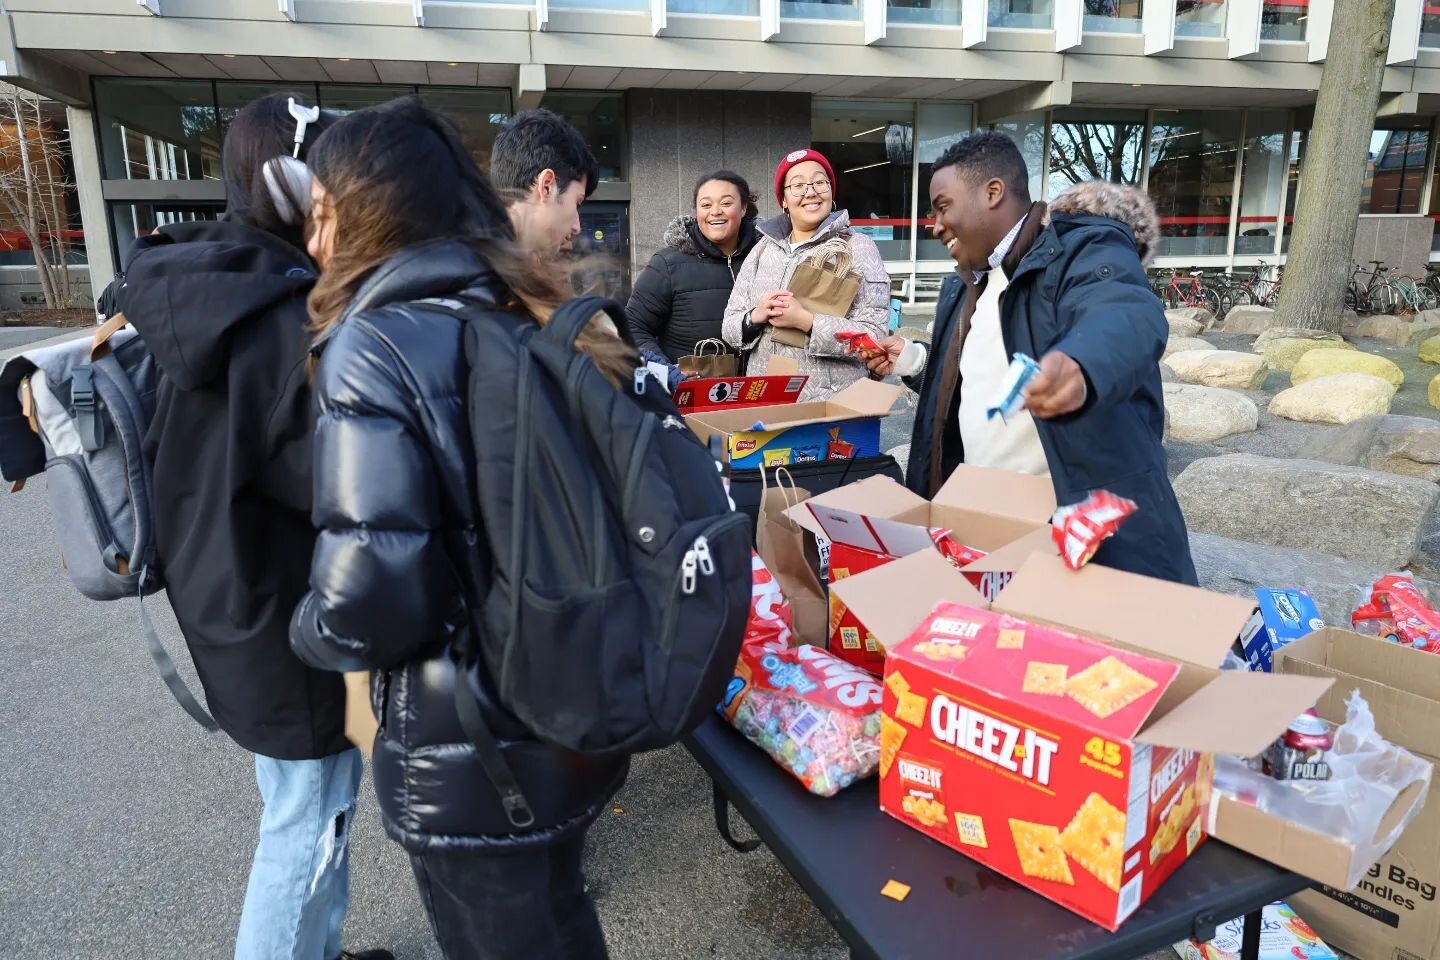 Happy Last Day of Classes, Harvard! 🥳 Hope everyone's reading period goes well, and we wish you the very best for your finals! 🤓

The HUA officers distributed free snacks and handwritten notes of encouragement for our students! 🥰

#harvard&nbsp;#h